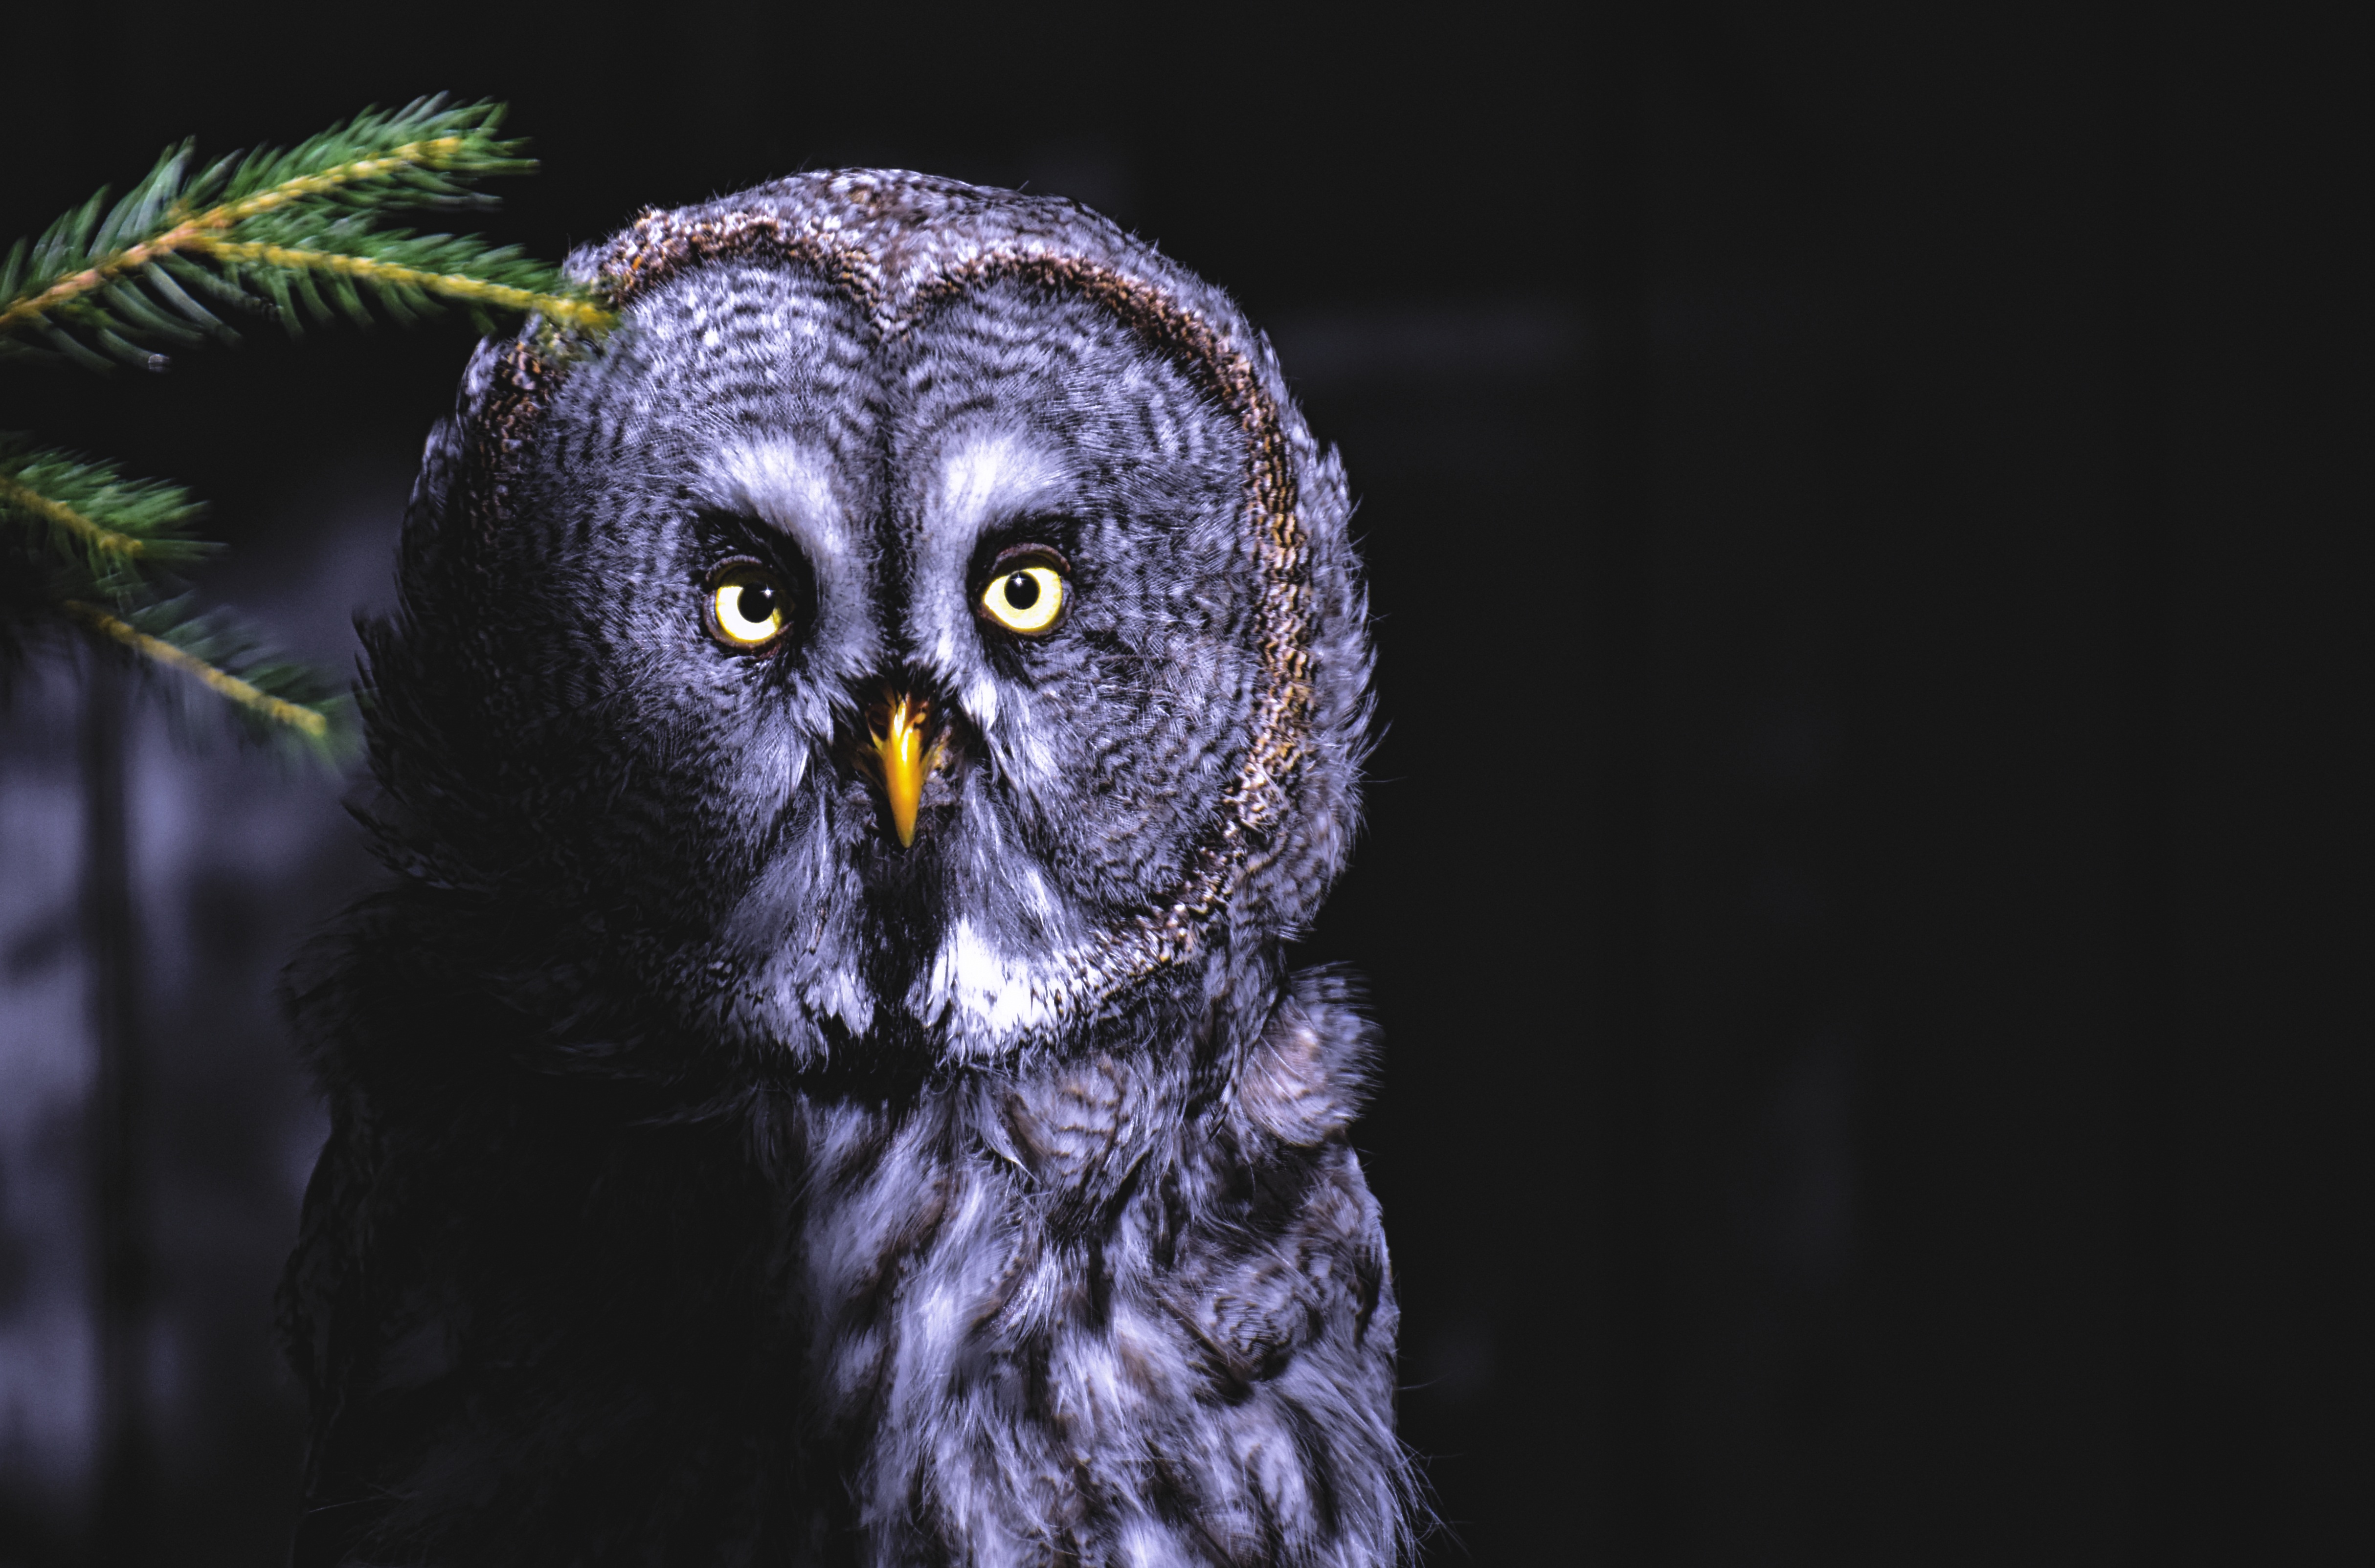 80802 3840x1080 PC pictures for free, download shadow, feathered, owl, looks 3840x1080 wallpapers on your desktop